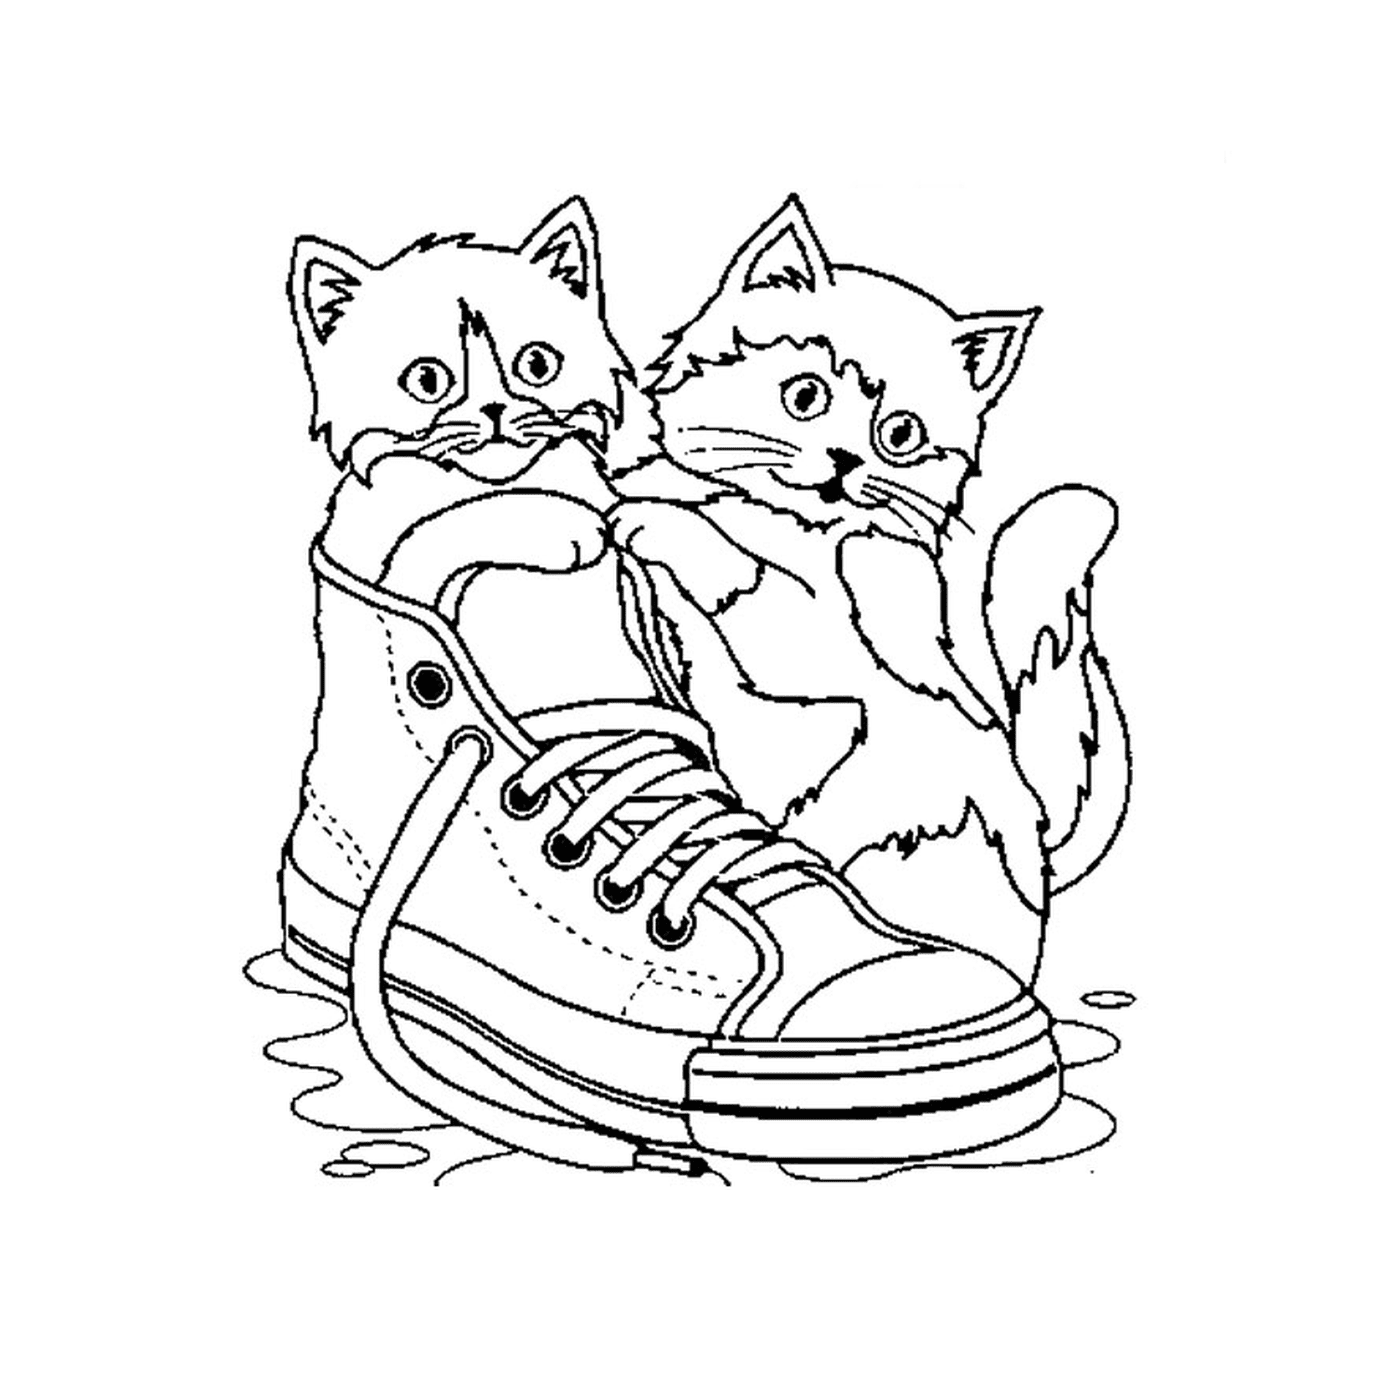  Two cats sitting on a shoe in the water 